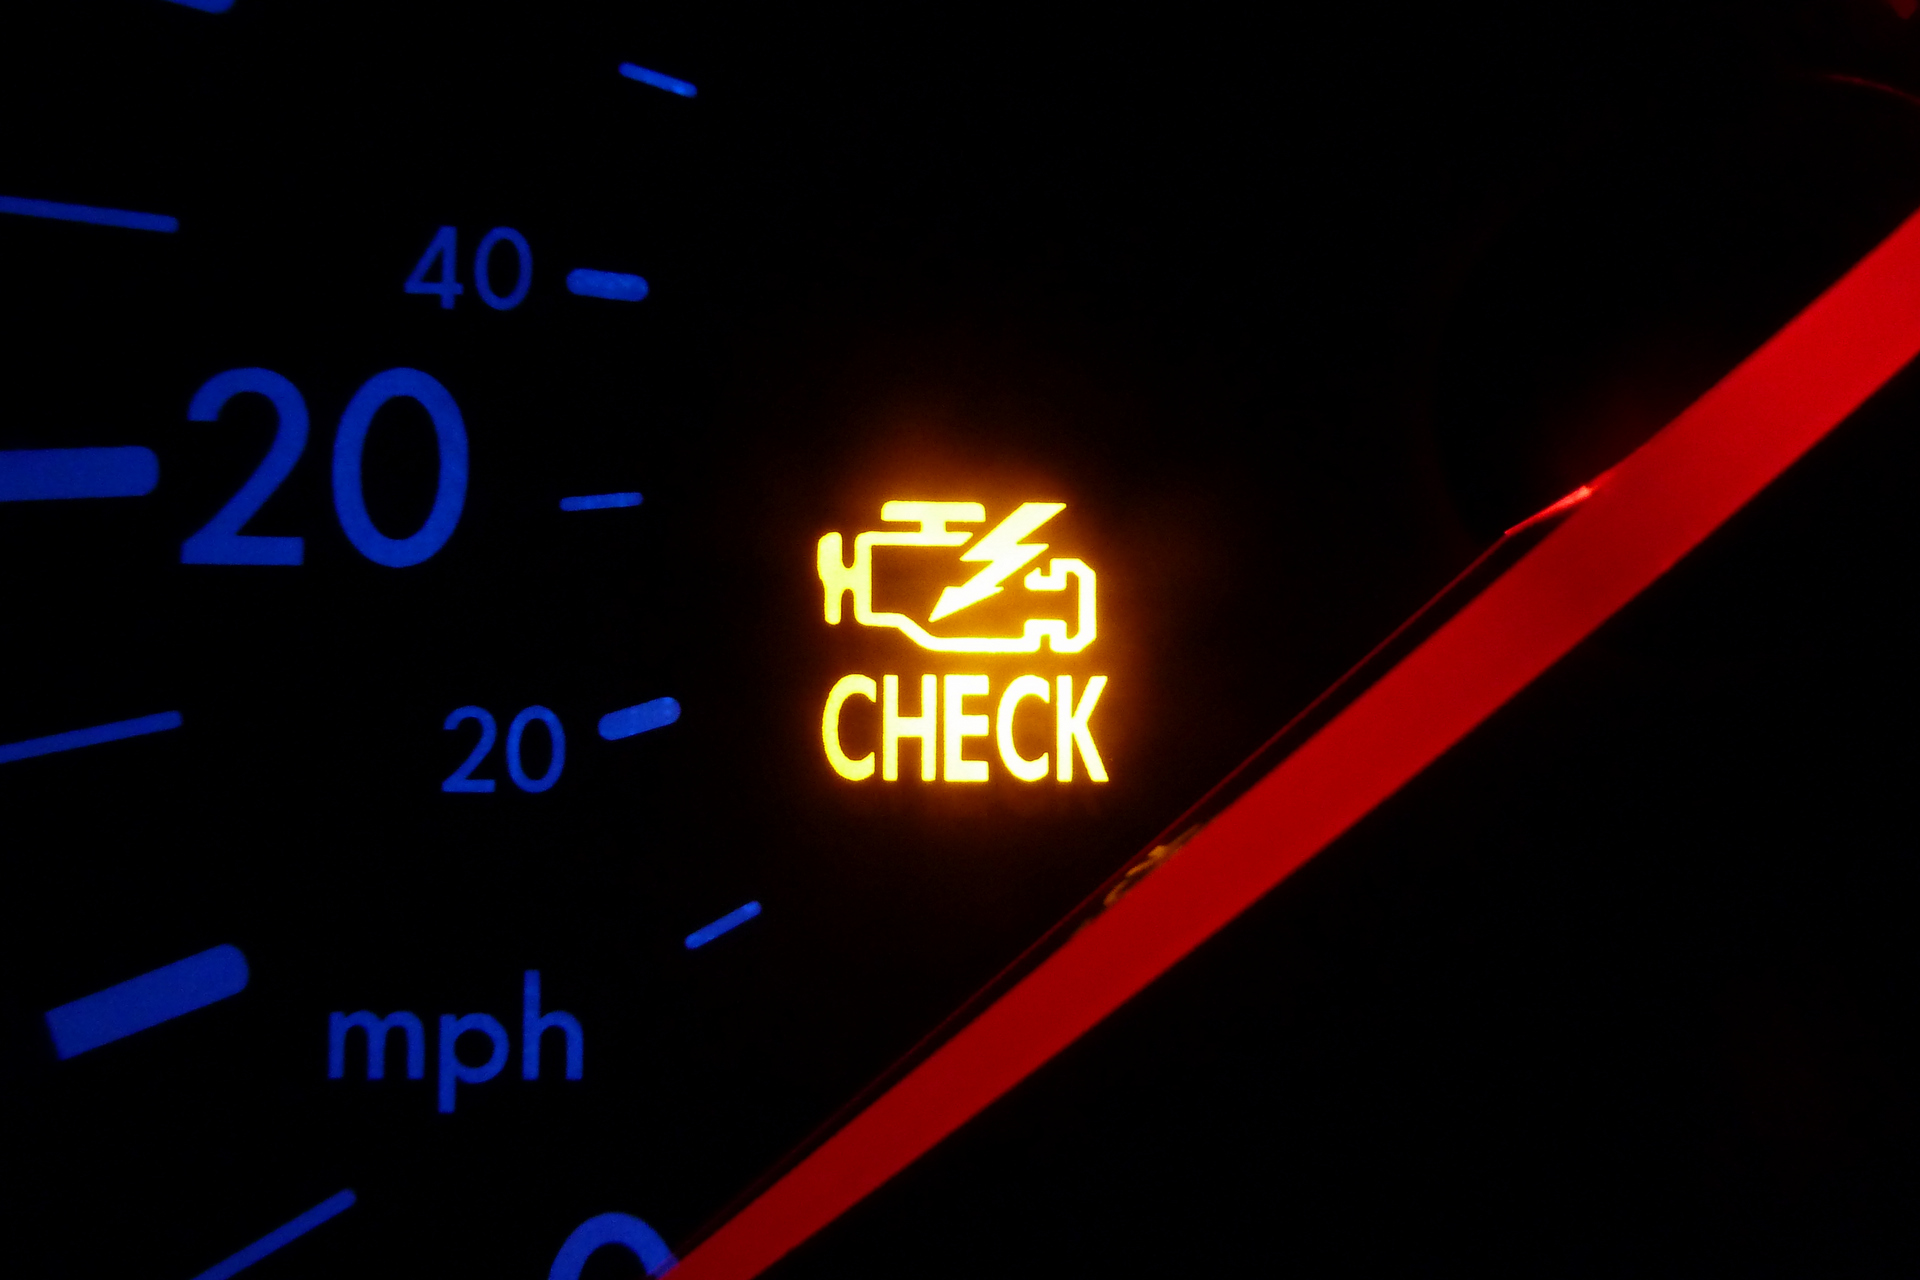 Why Would a Check Engine Light Come On?